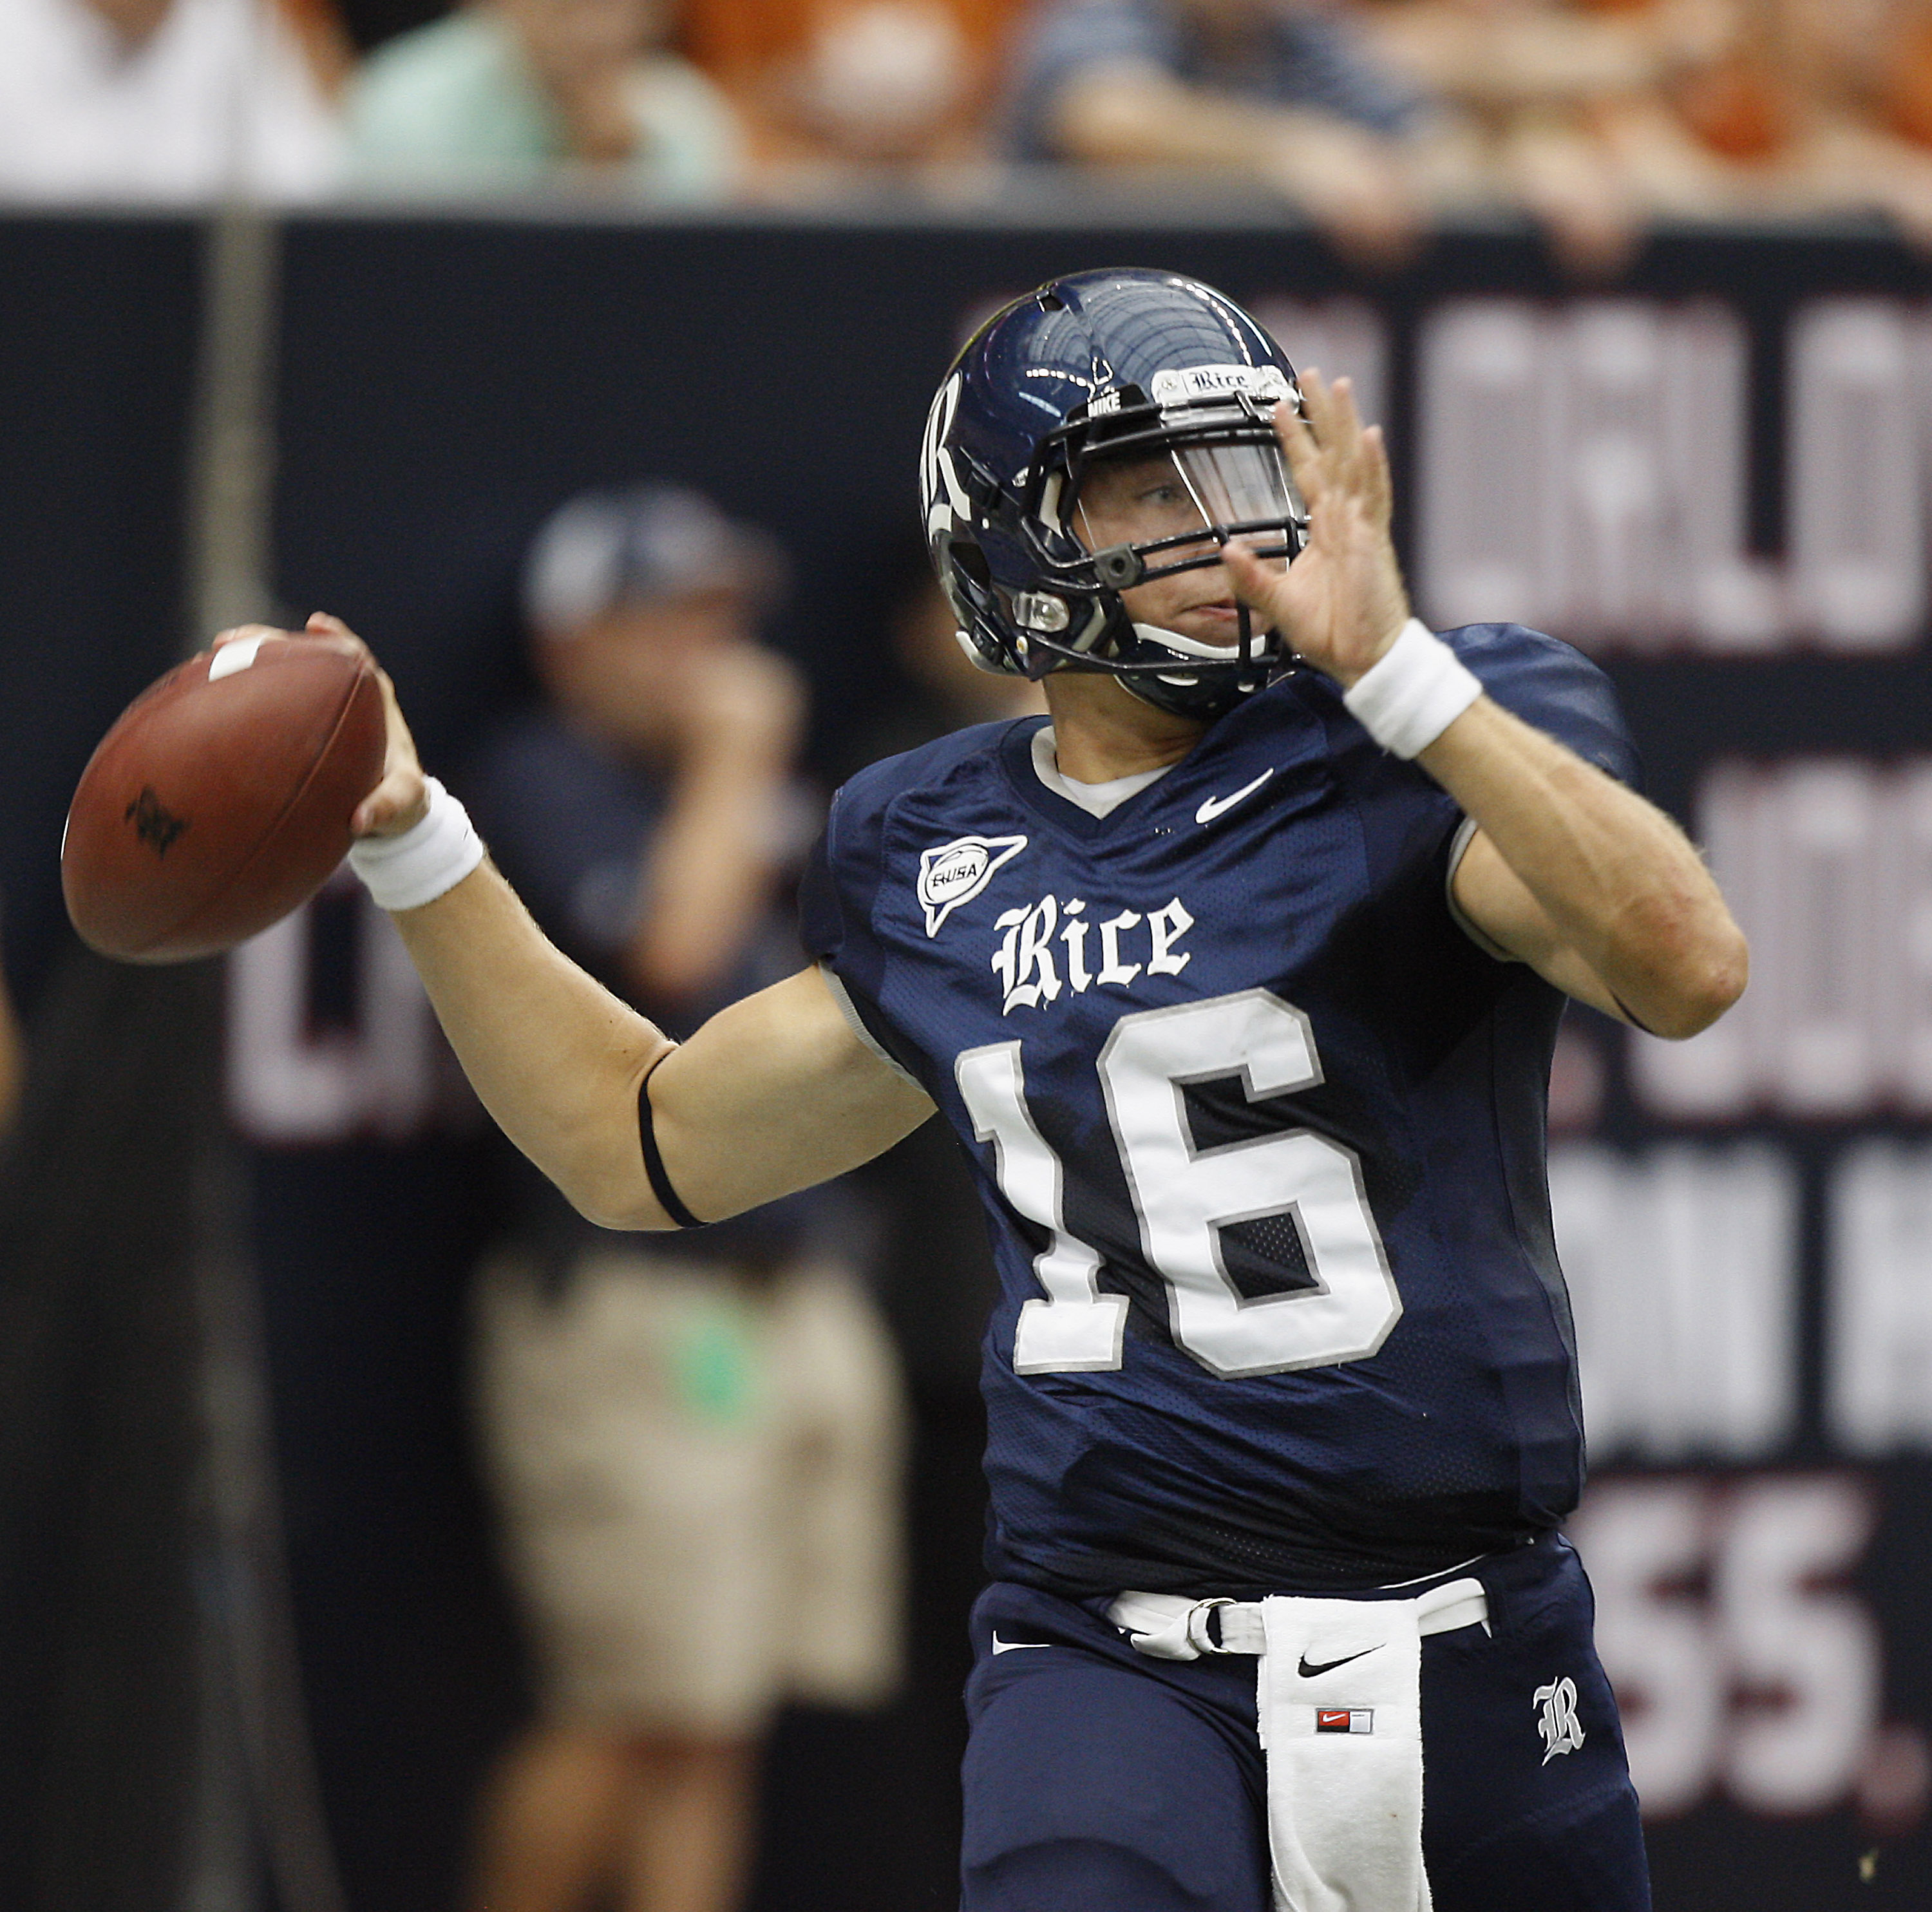 HOUSTON - SEPTEMBER 04:  Quarterback Taylor McHargue #16 of the Rice Owls throws downfield against the Texas Limghorns> at Reliant Stadium on September 4, 2010 in Houson, Texas.  (Photo by Bob Levey/Getty Images)